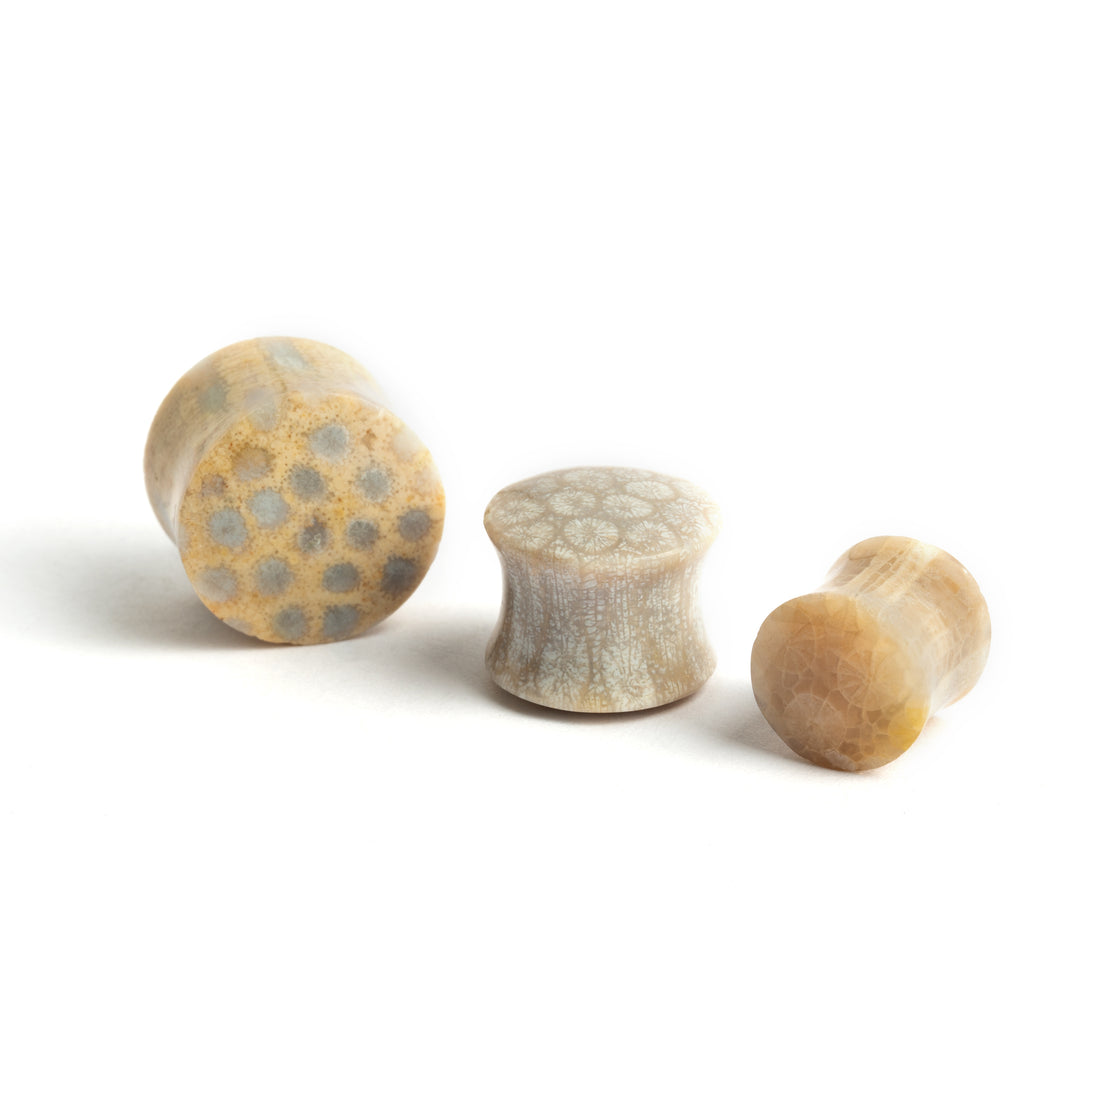 several sizes of Fossil Coral double flare stone ear plugs side and front view 